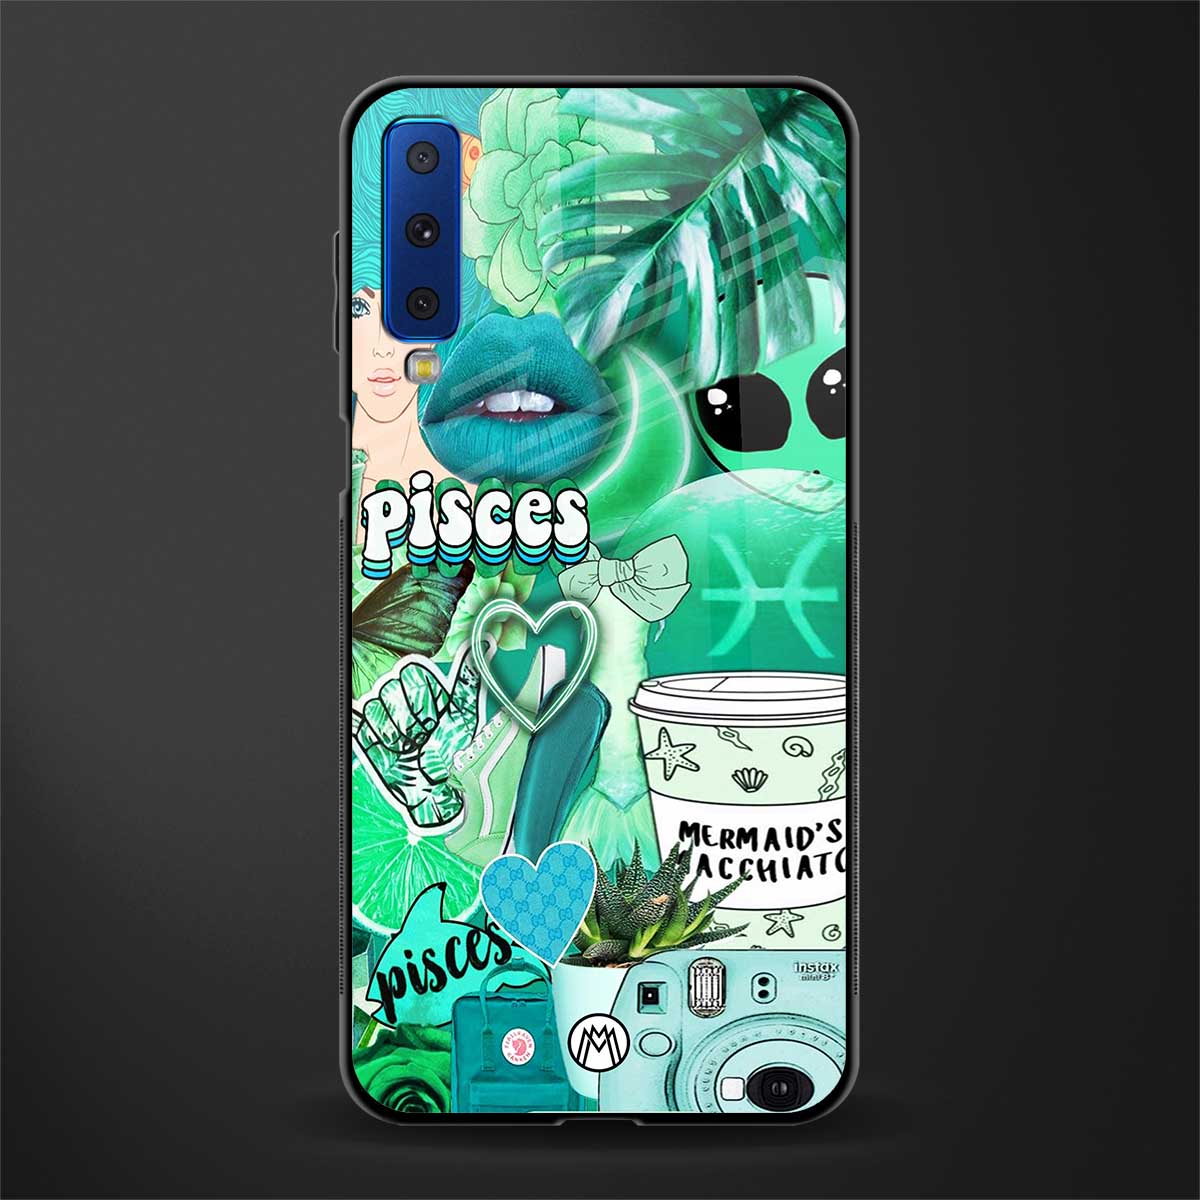 pisces aesthetic collage glass case for samsung galaxy a7 2018 image